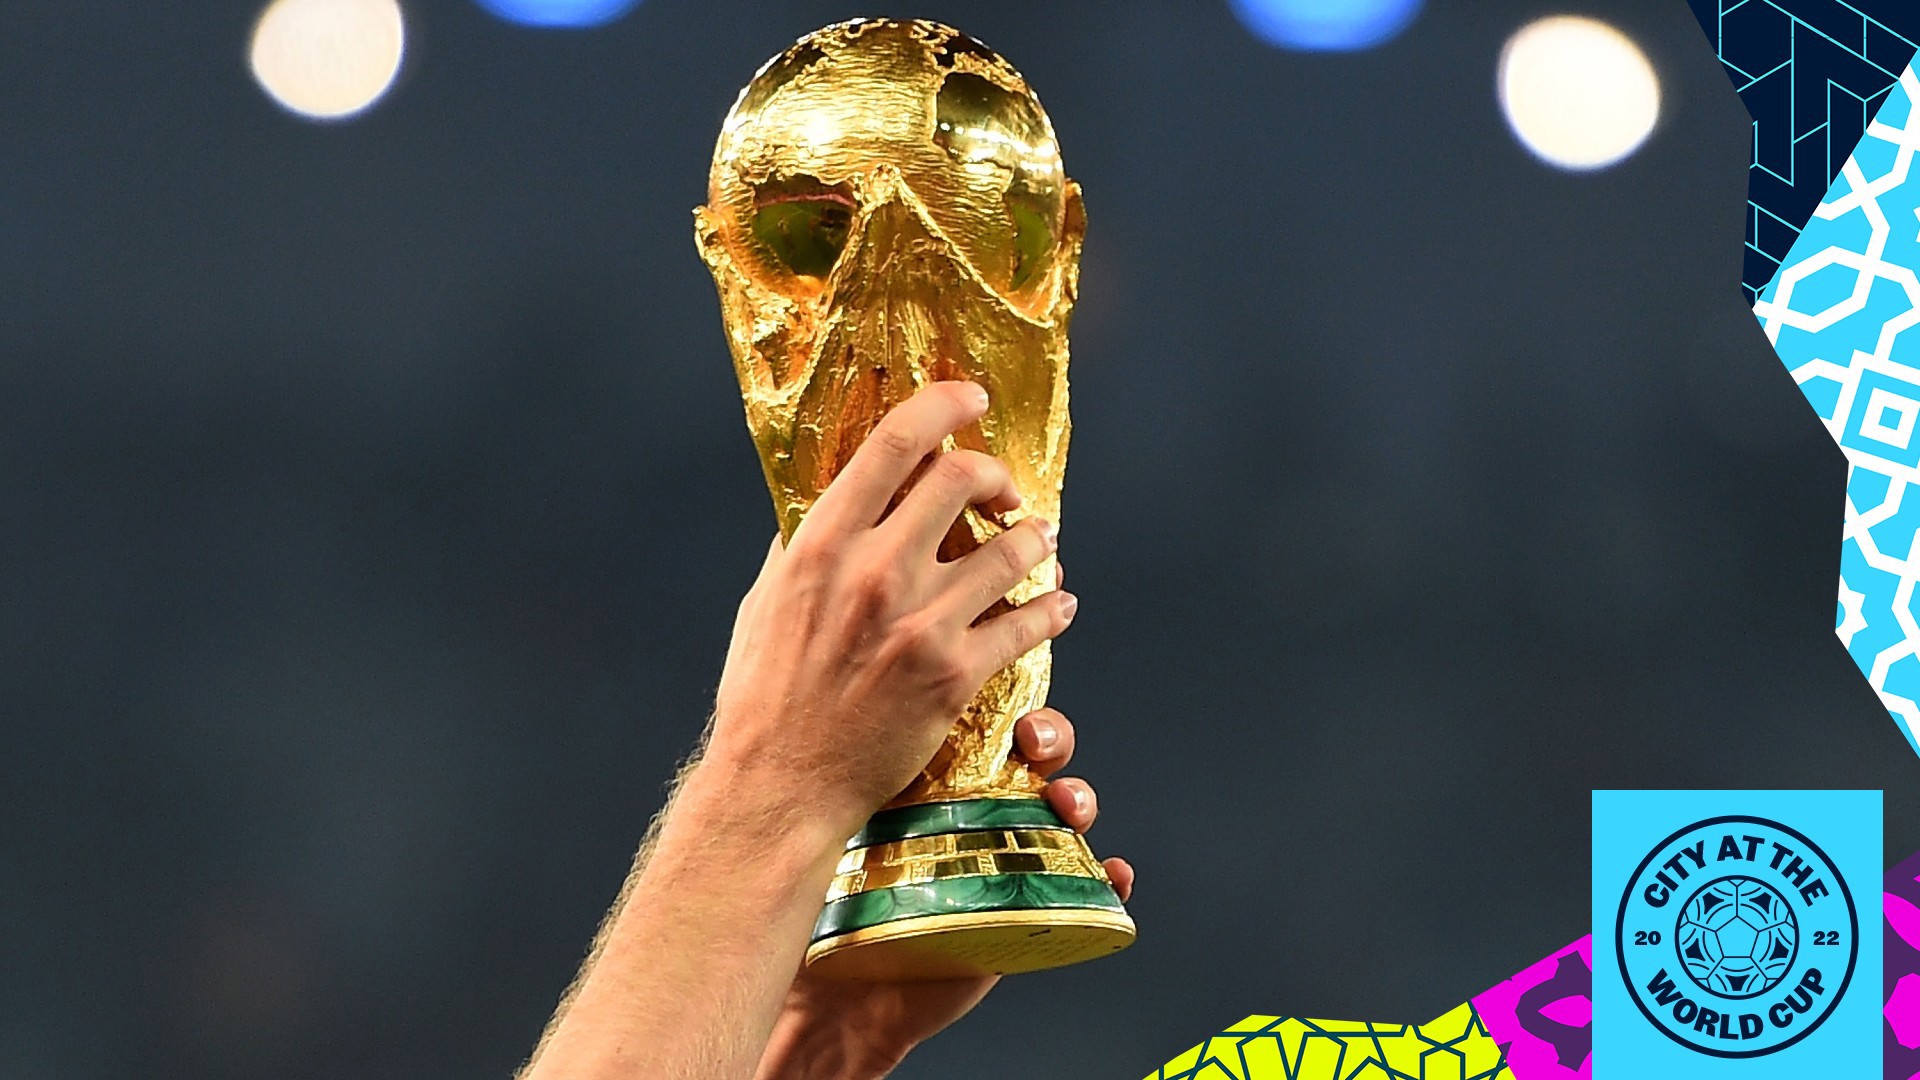 World Cup 2022 City players, squad numbers, groups and fixtures